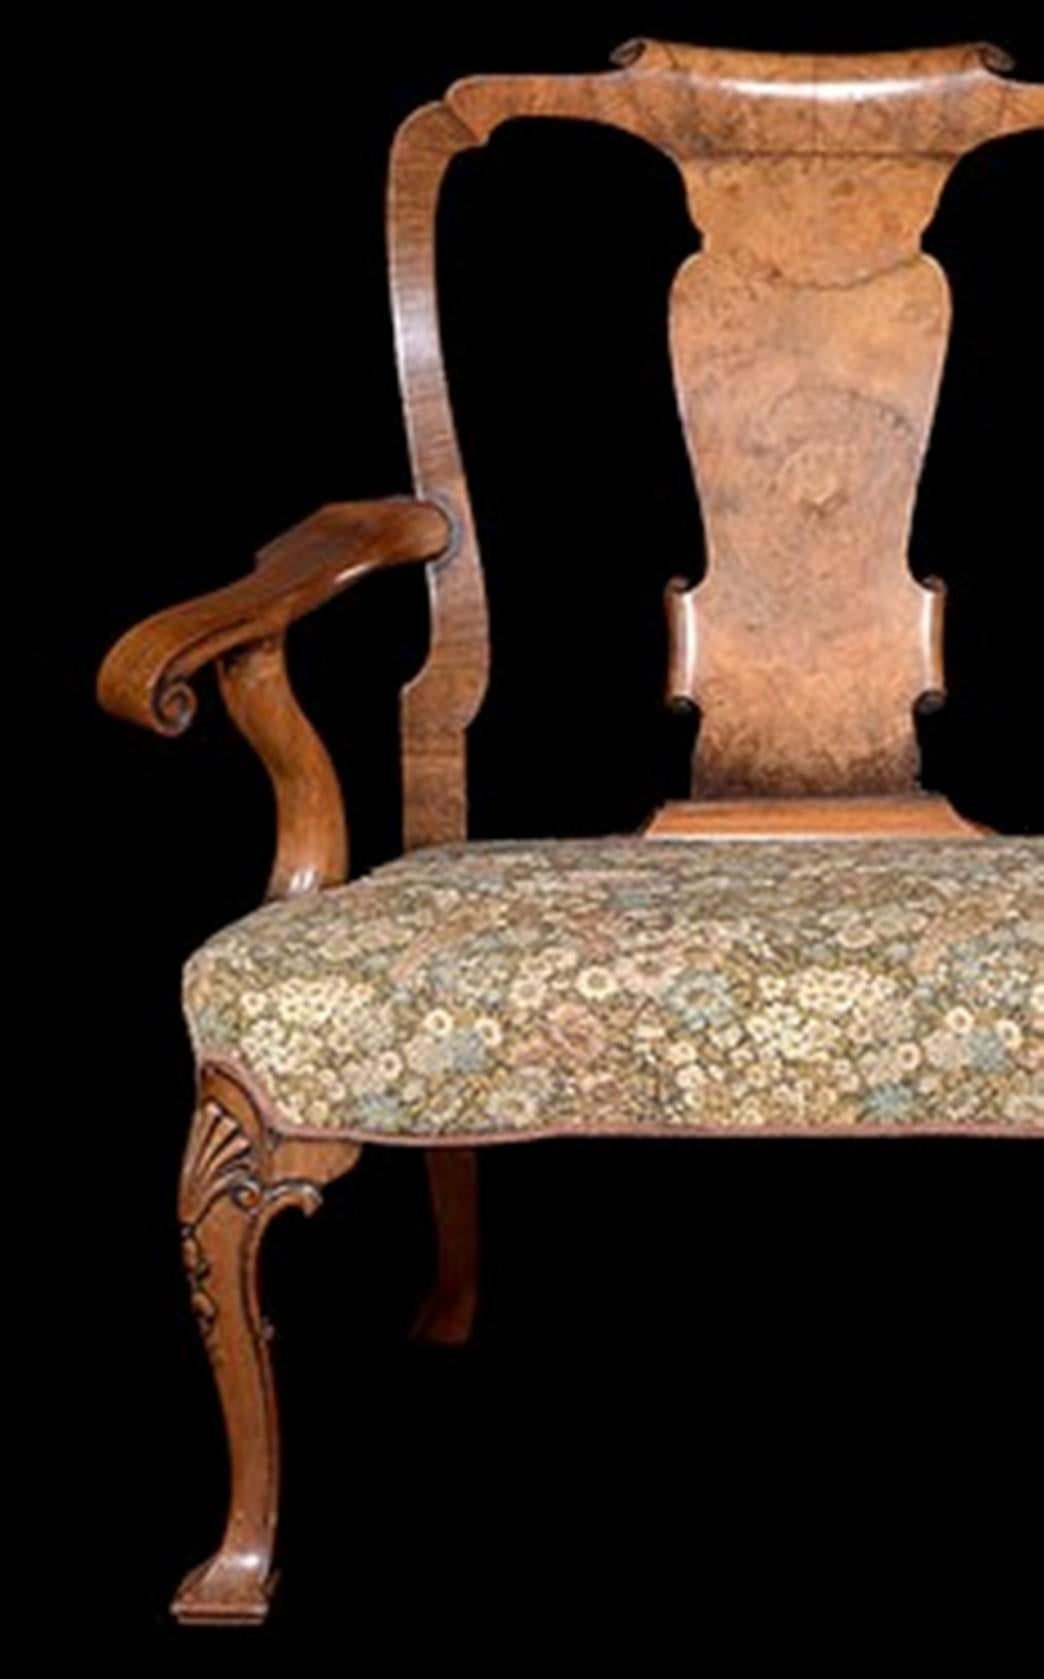 A Geo 11 style carved walnut chair-back sofa with vase shaped splats and scroll end arms.

The whole supported on six cabriole legs with shell carving to the knees and ending on chiseled pad feet.
The seat is currently upholstered in a floral